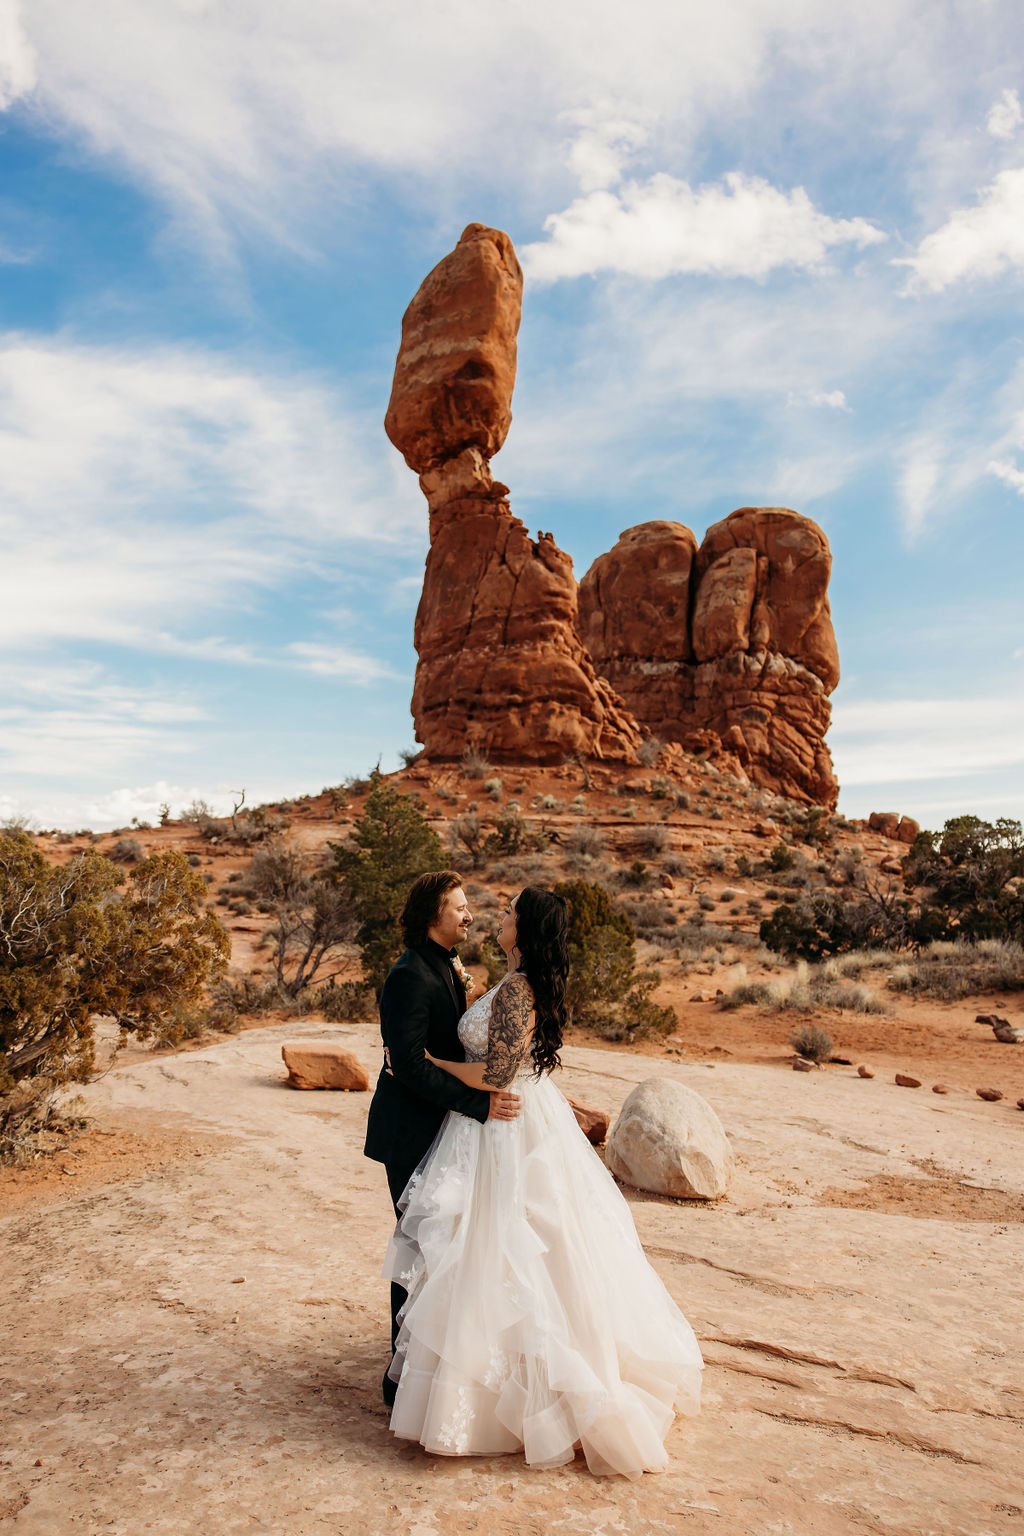 A couple in wedding attire embracing in front of the balanced rock formation in arches national park. | PHOTOGRAPHY BY BROGAN |  5 REASONS TO HAVE A MOAB NATIONAL PARK ELOPEMENT 